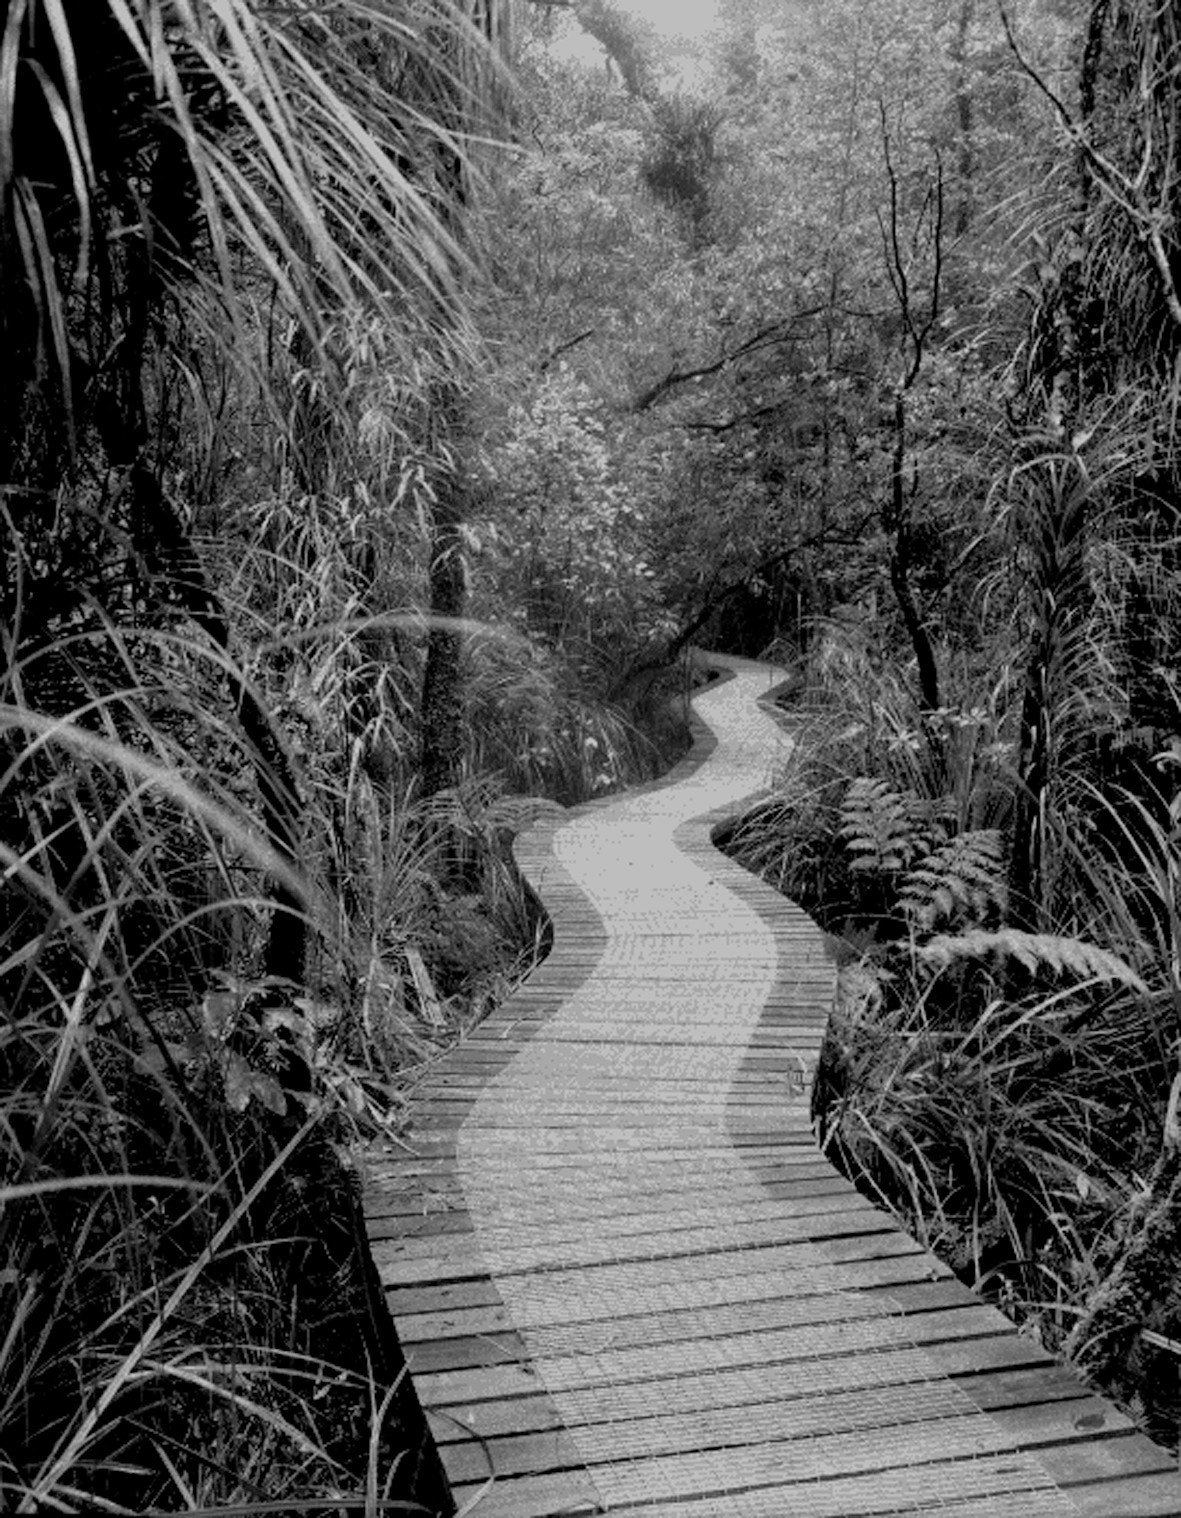 A winding boardwalk pathway disappearing into native forest.